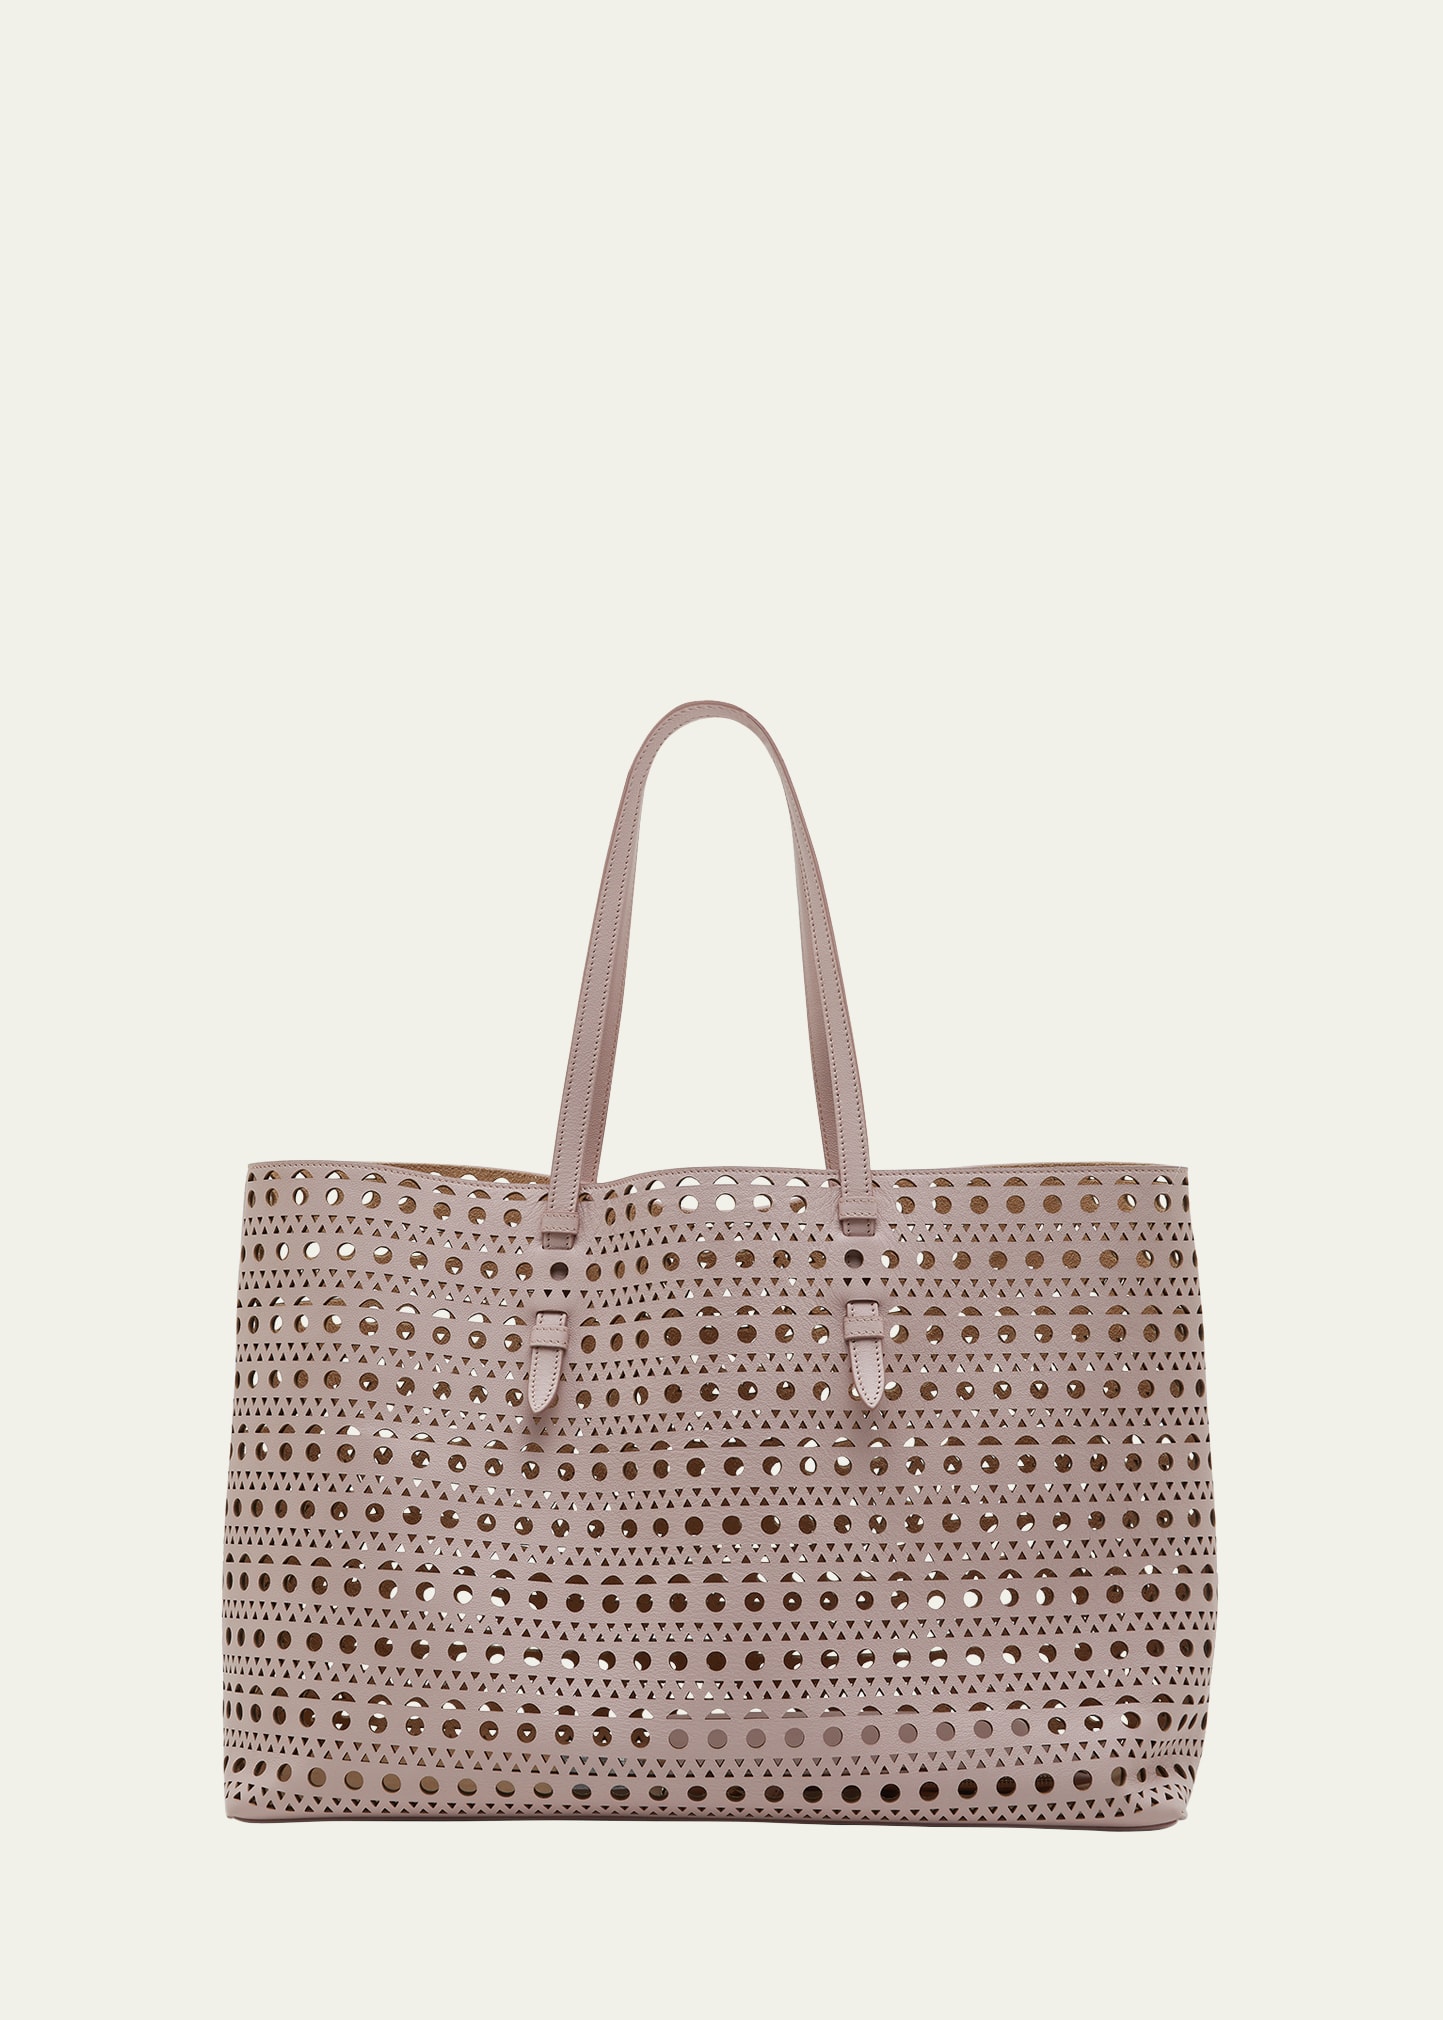 Mina 44 East West Tote in Optical Perforated Leather